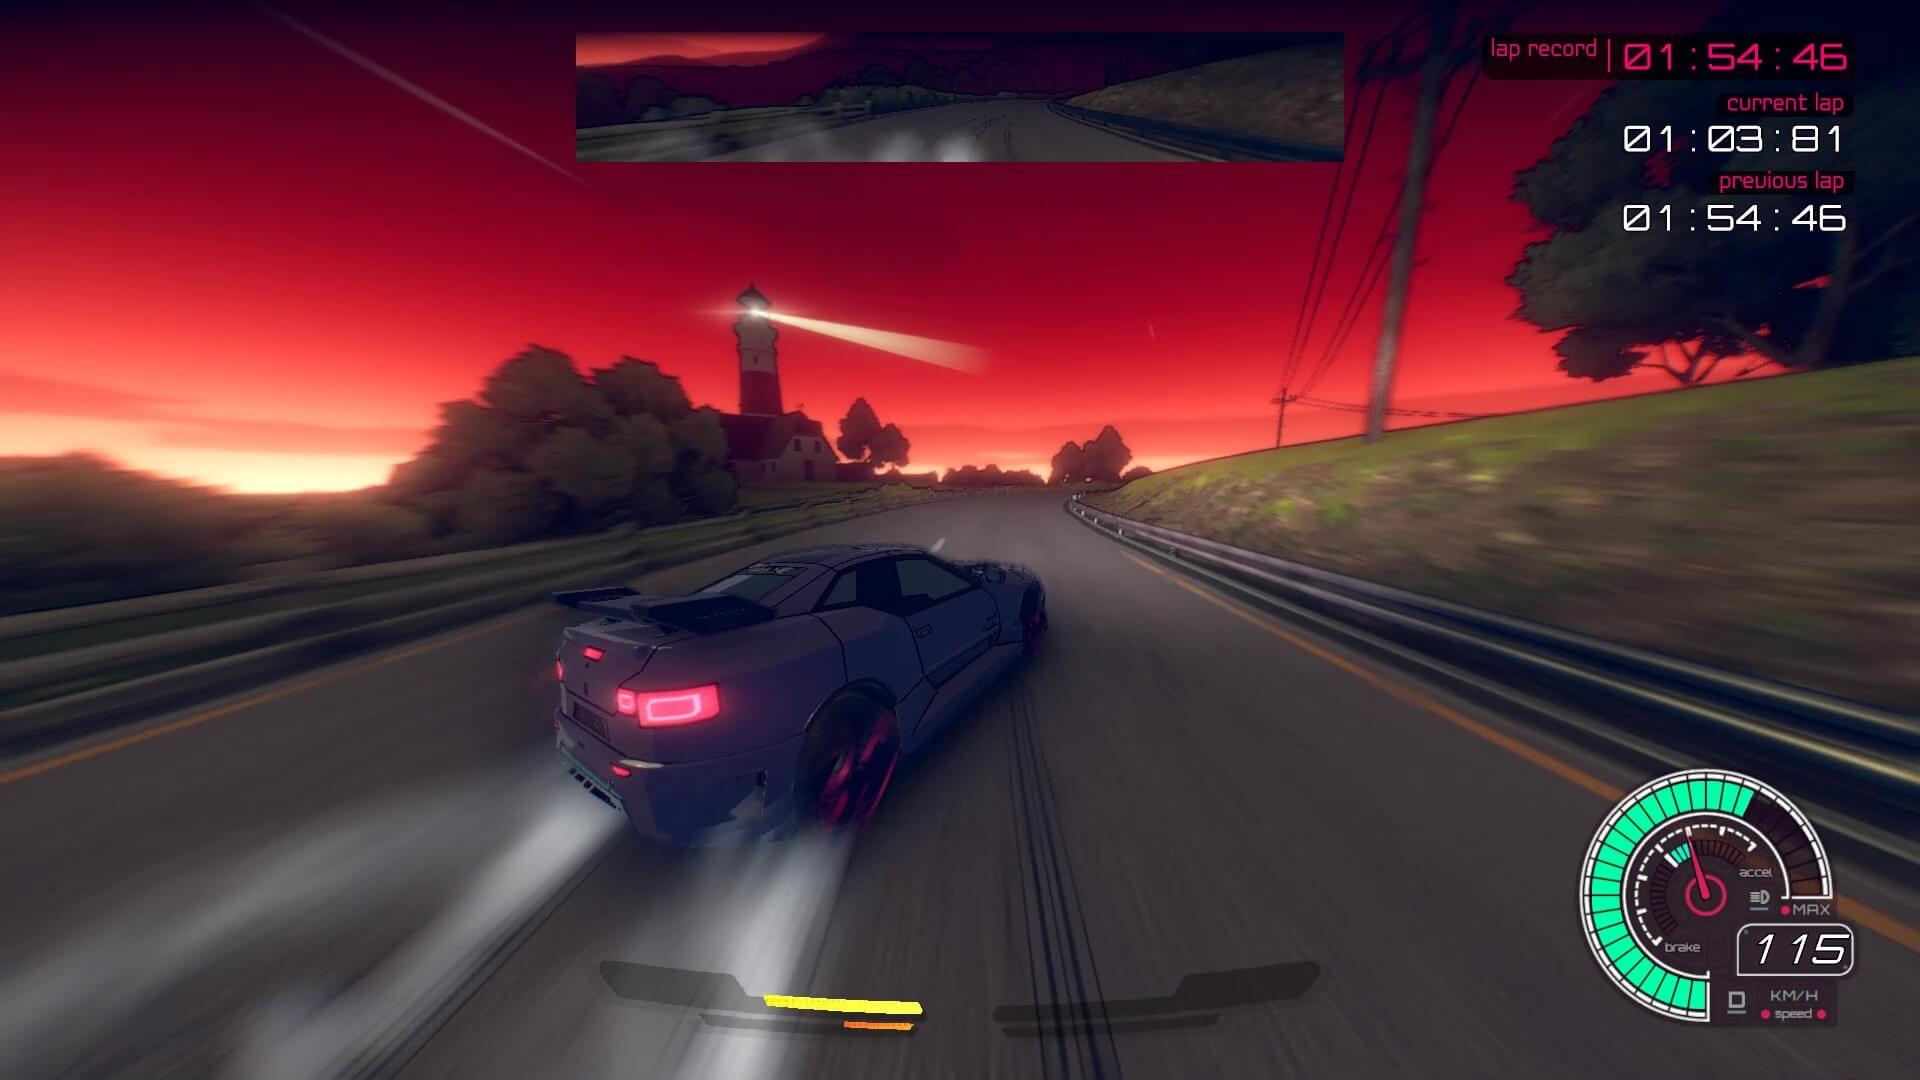 Inertial Drift: Sunset Prologue is now available for free on Steam